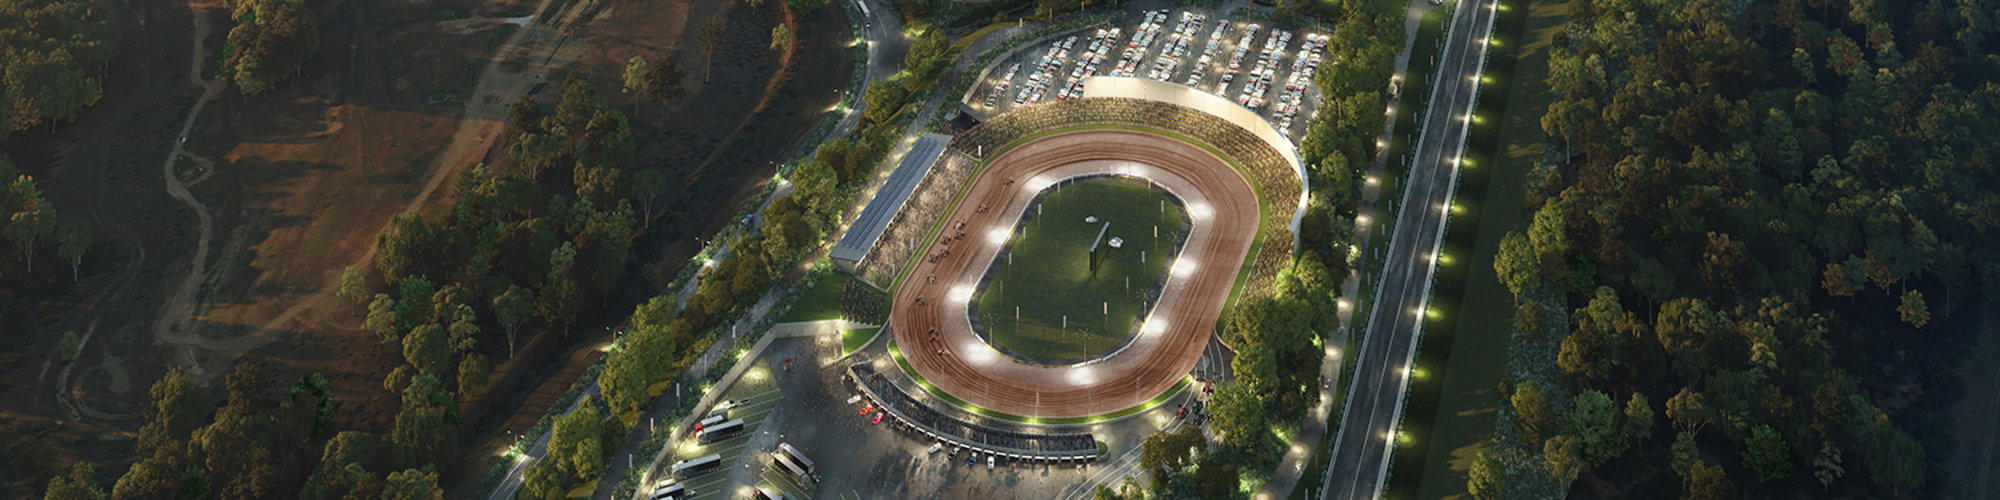 An artist's impression of an aerial view of the proposed new Sydney International Speedway at Eastern Creek.